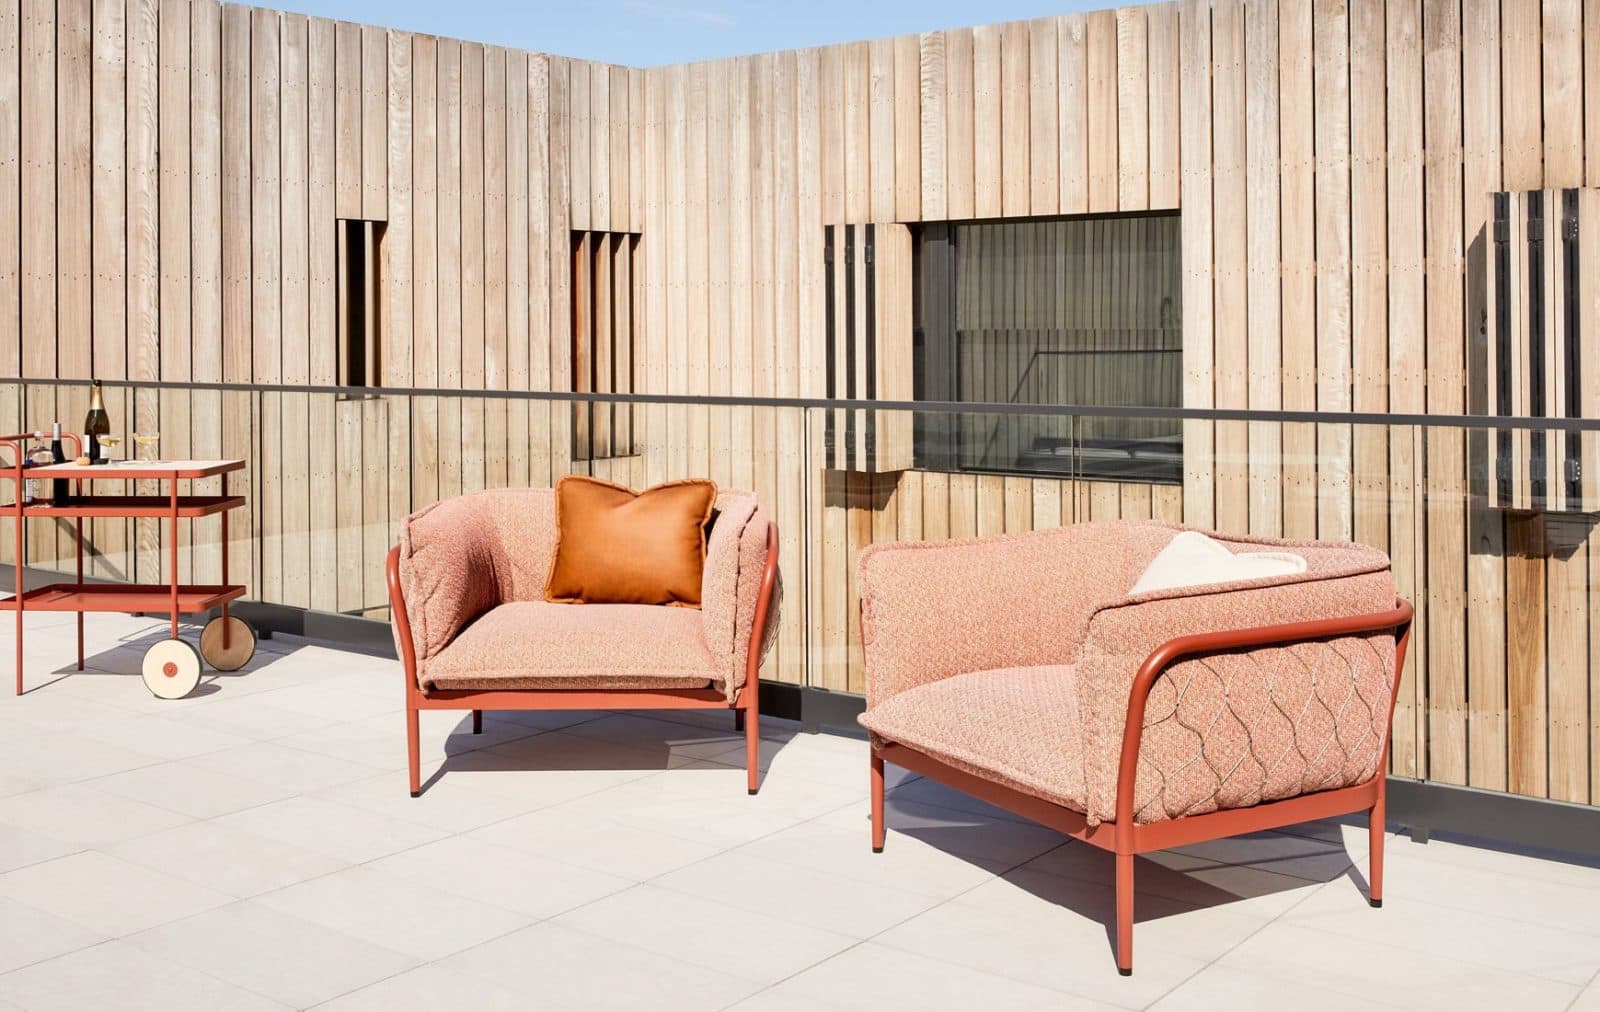 You don't often hear outdoor furniture described as sexy, but the Trace Outdoor Armchair is an unarguably luxury outdoor upholstered armchair.